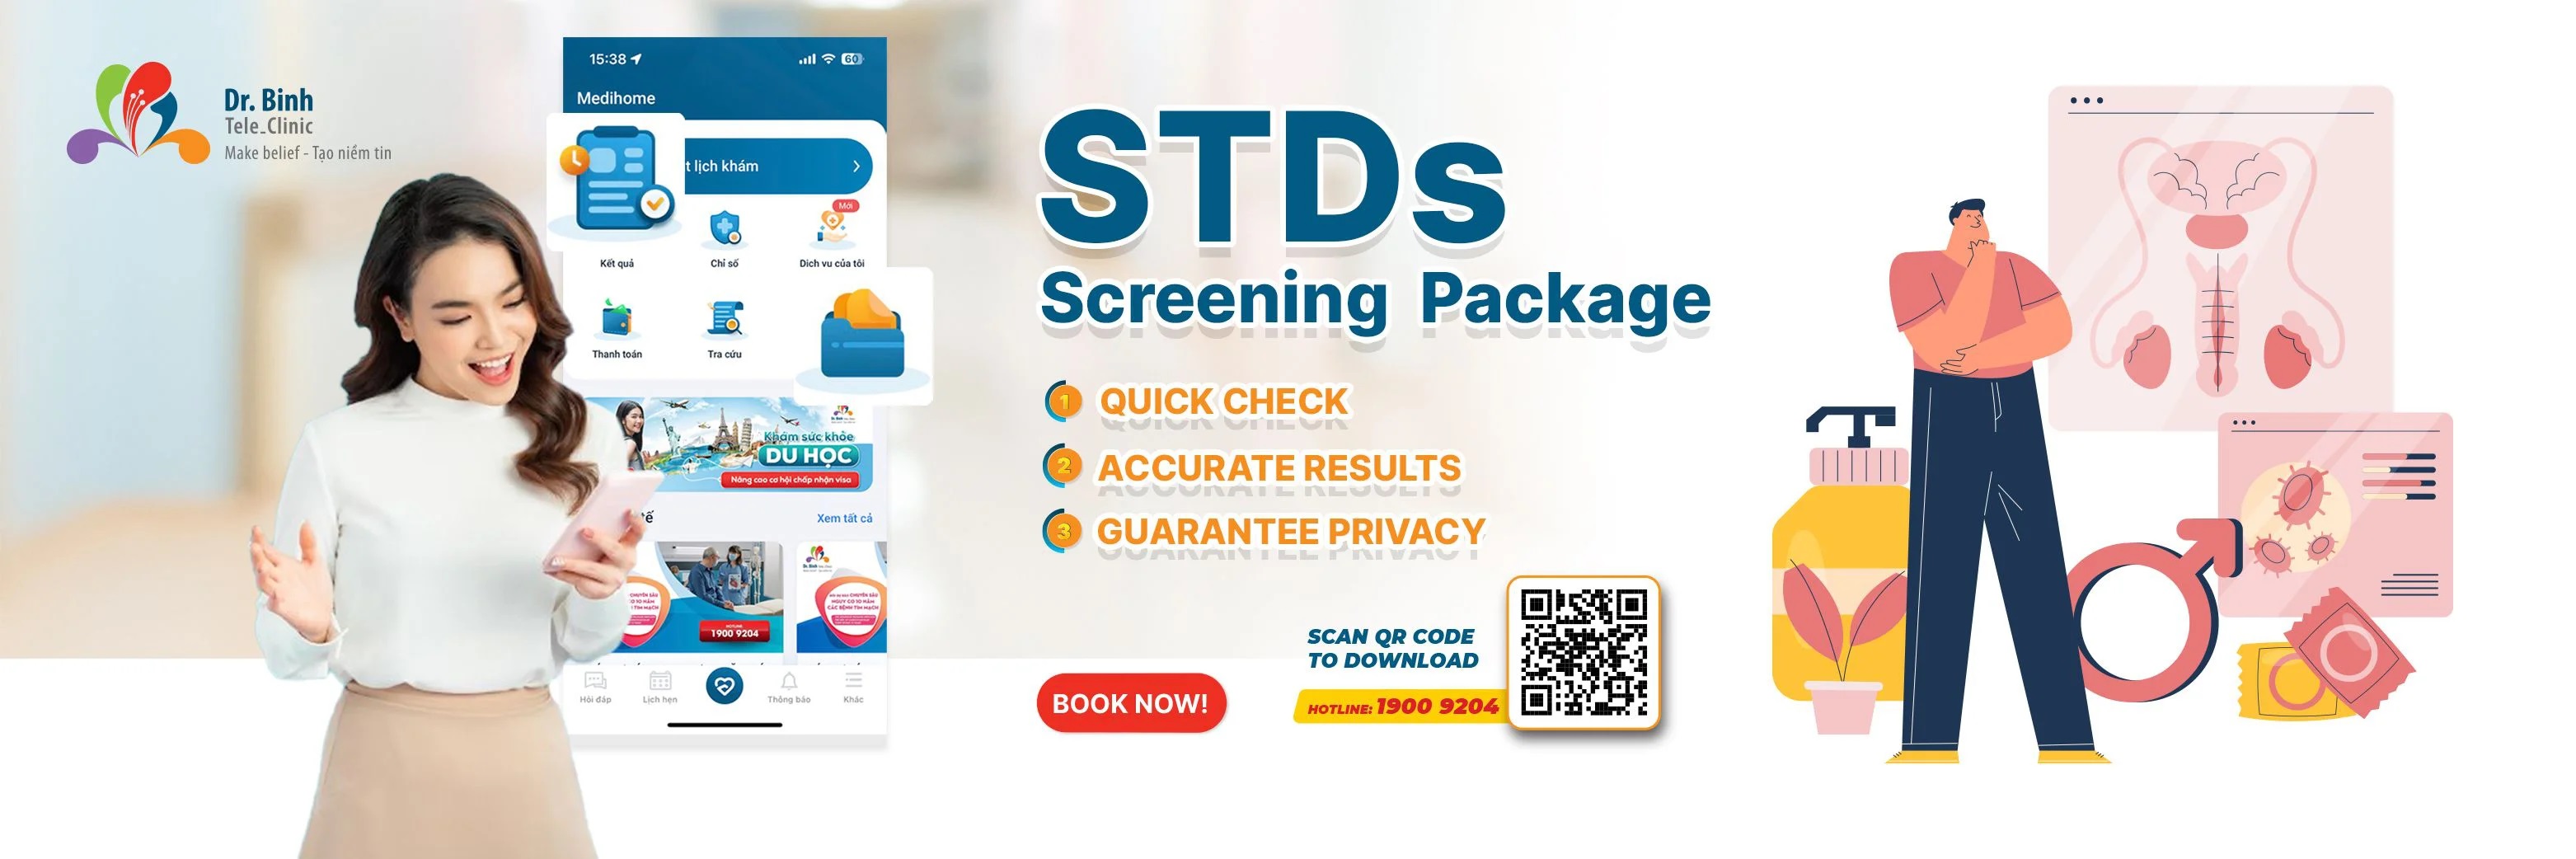 STDs healthcheck package